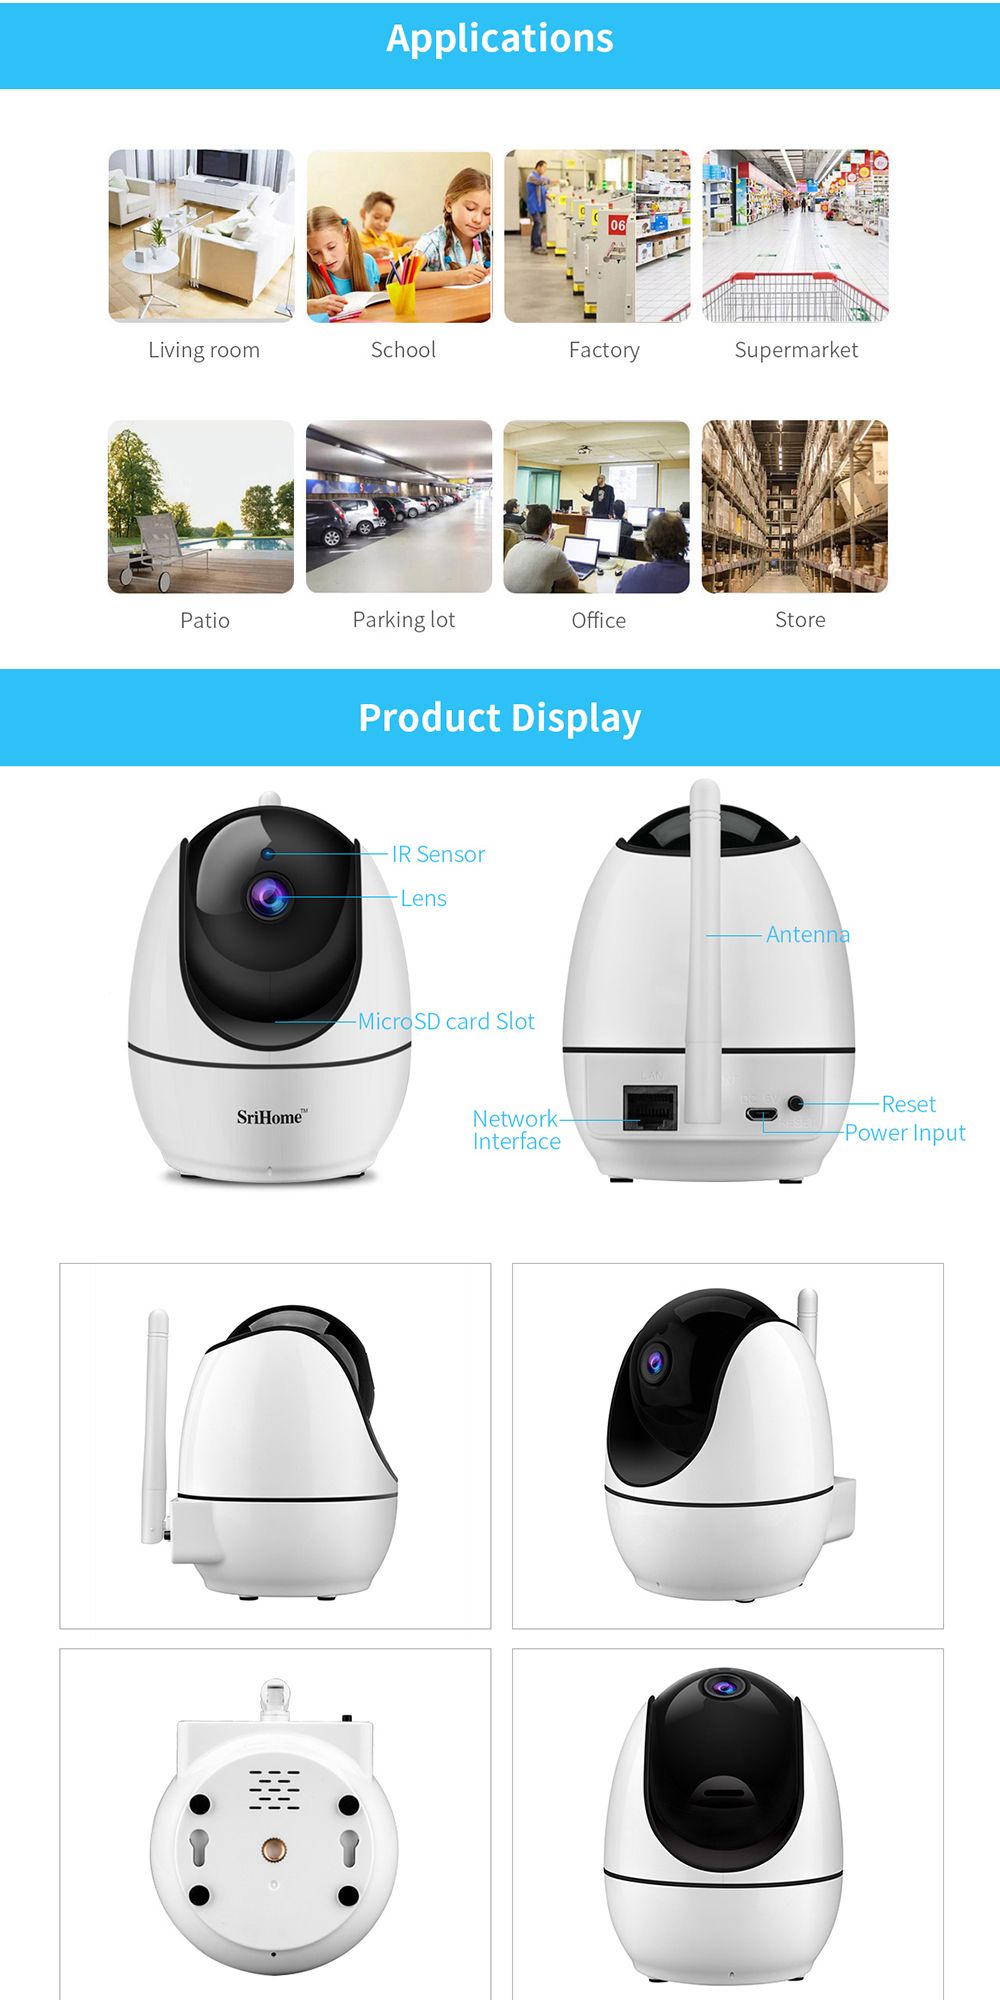 Sricam-SH026-WiFi-IP-Camera-1080P-Wireless-Security-HD-24G-Smart-Networking-Night-Vision-for-Smart-H-1527201